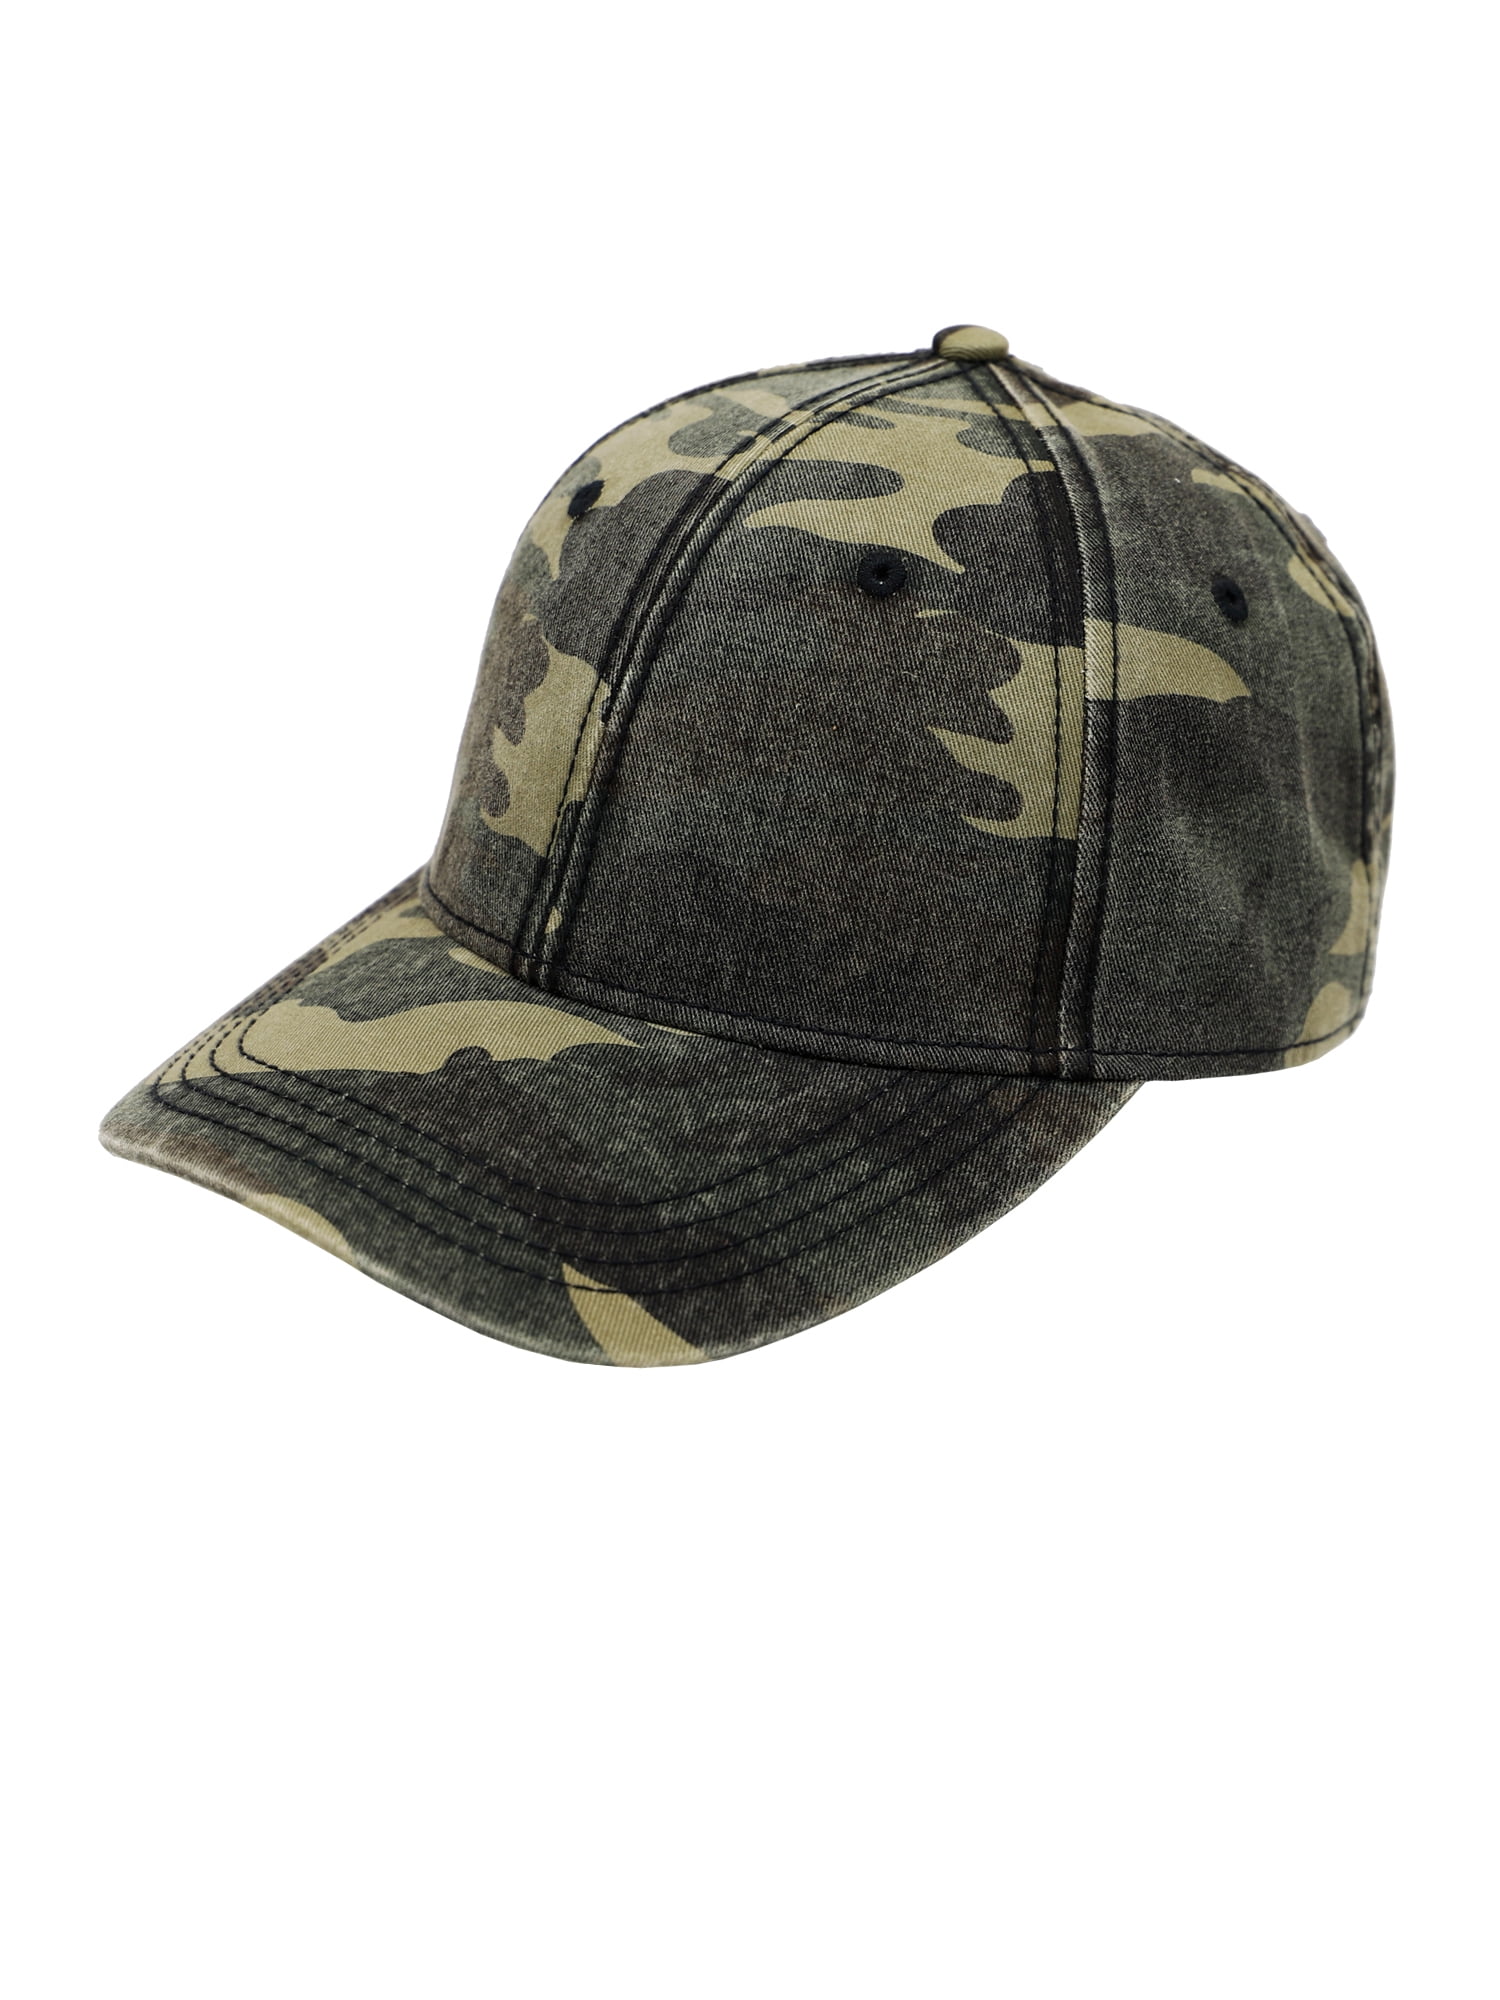 George Men's Camo Baseball Hat, Size: One size, Green